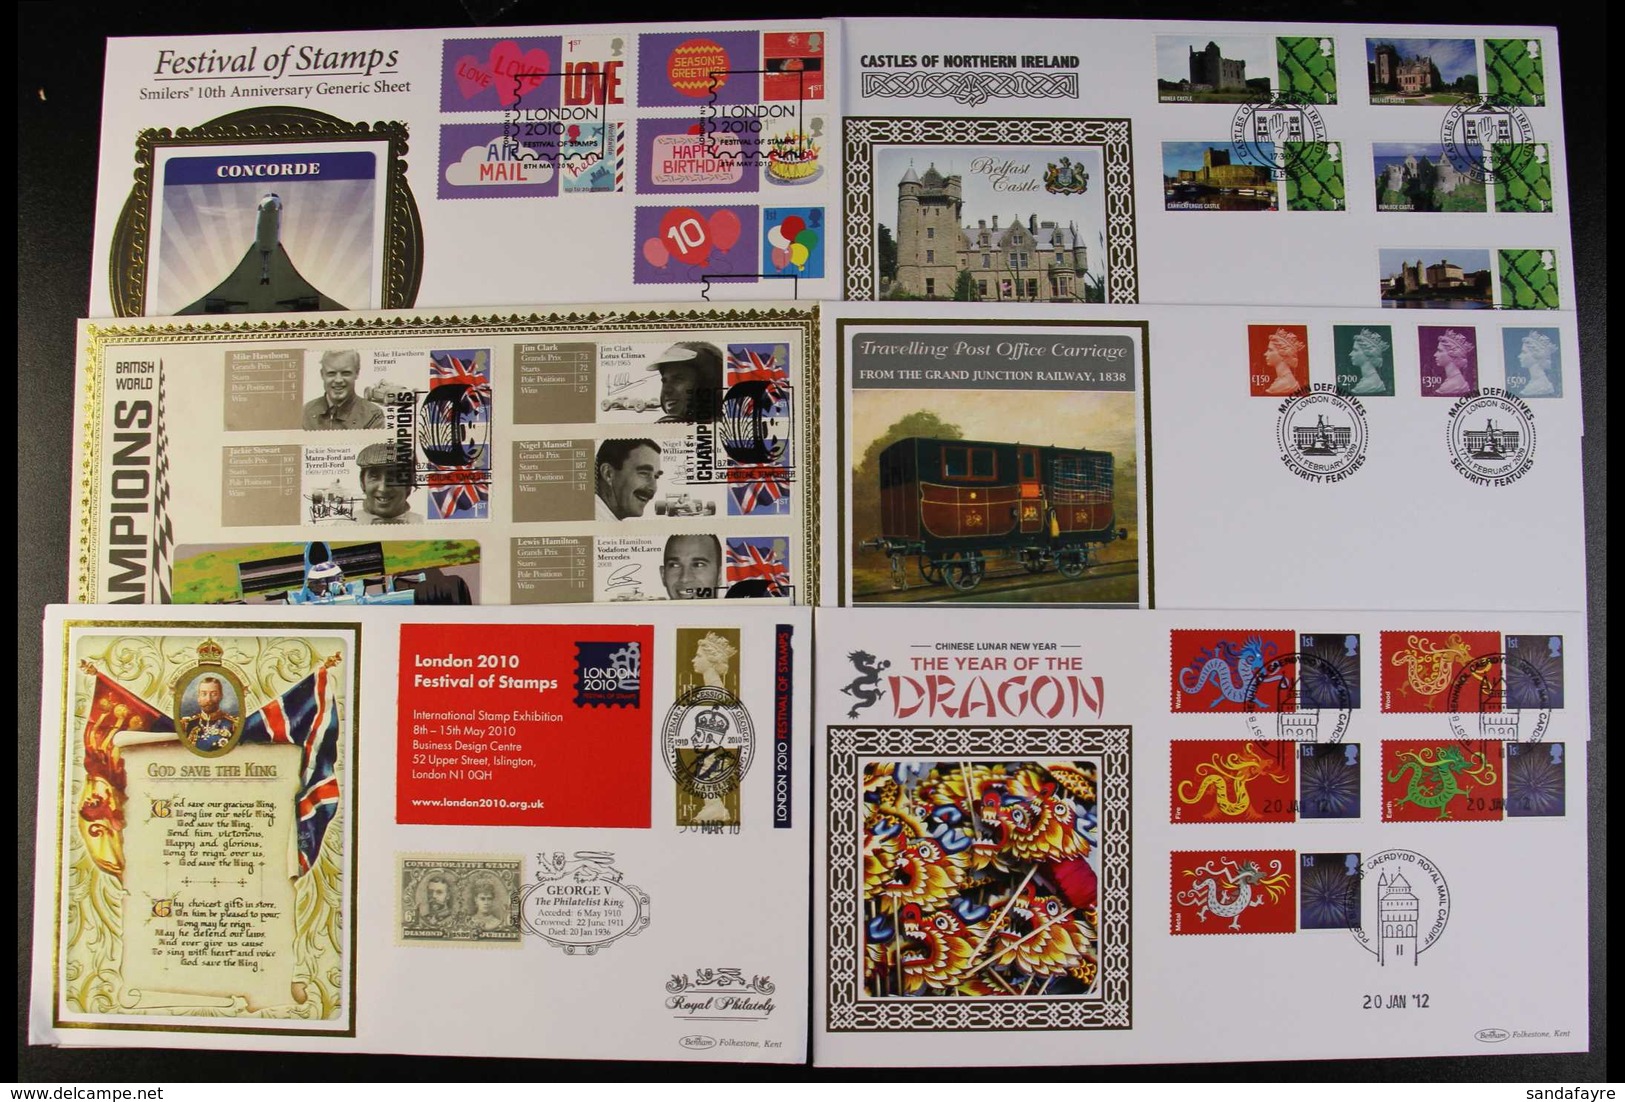 1970-2012 DEFINITIVE FIRST DAY COVERS. An Attractive Collection Of Definitive Issues, With Regionals, Occasions, Smilers - FDC